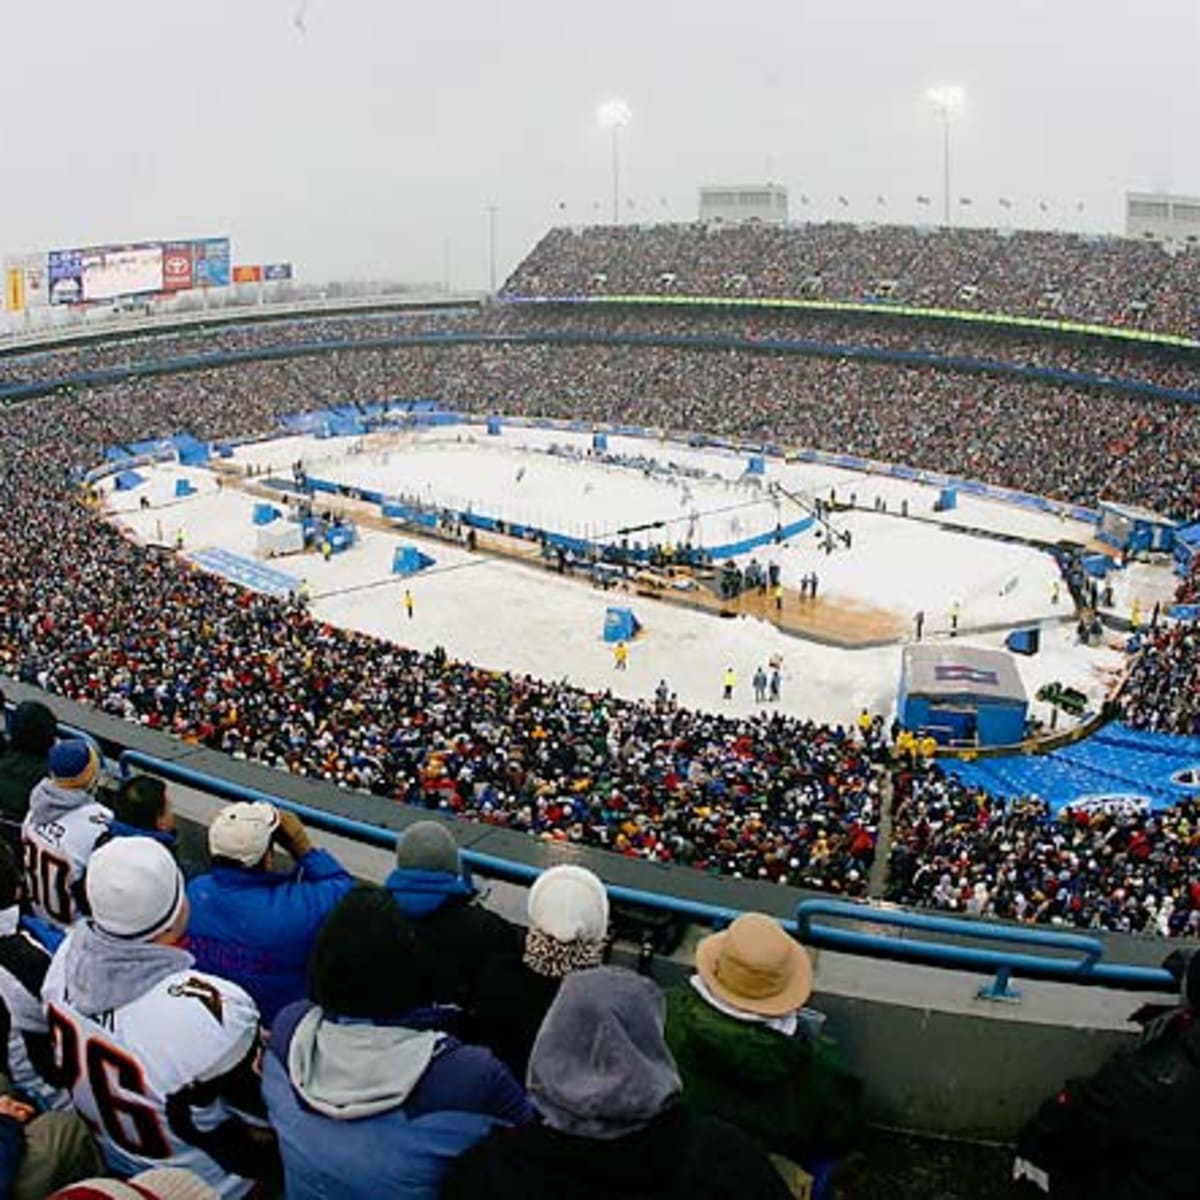 NHL Winter Classic has come a long way since 2008